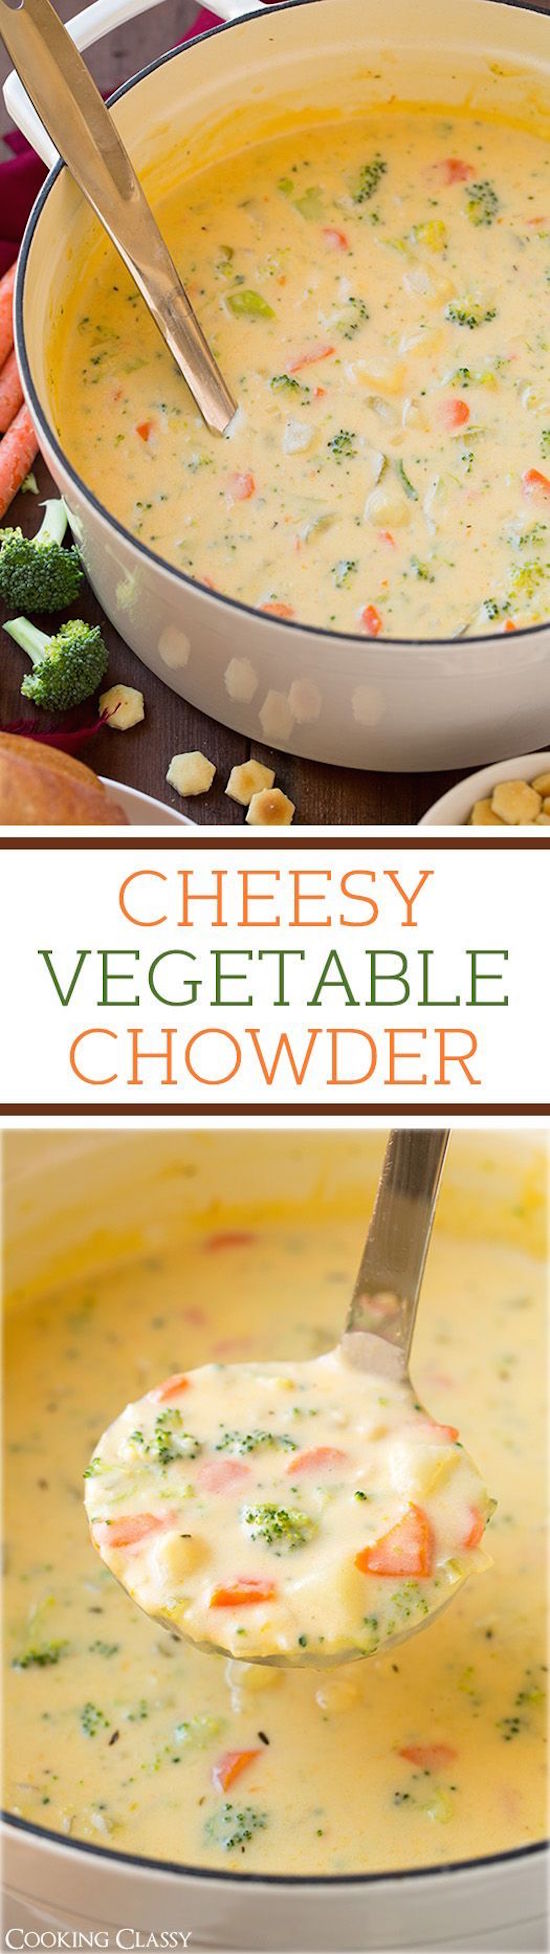 Cheesy Vegetable Chowder - that the whole family LOVED it! It is like broccoli cheese soup meets creamy potato soup.